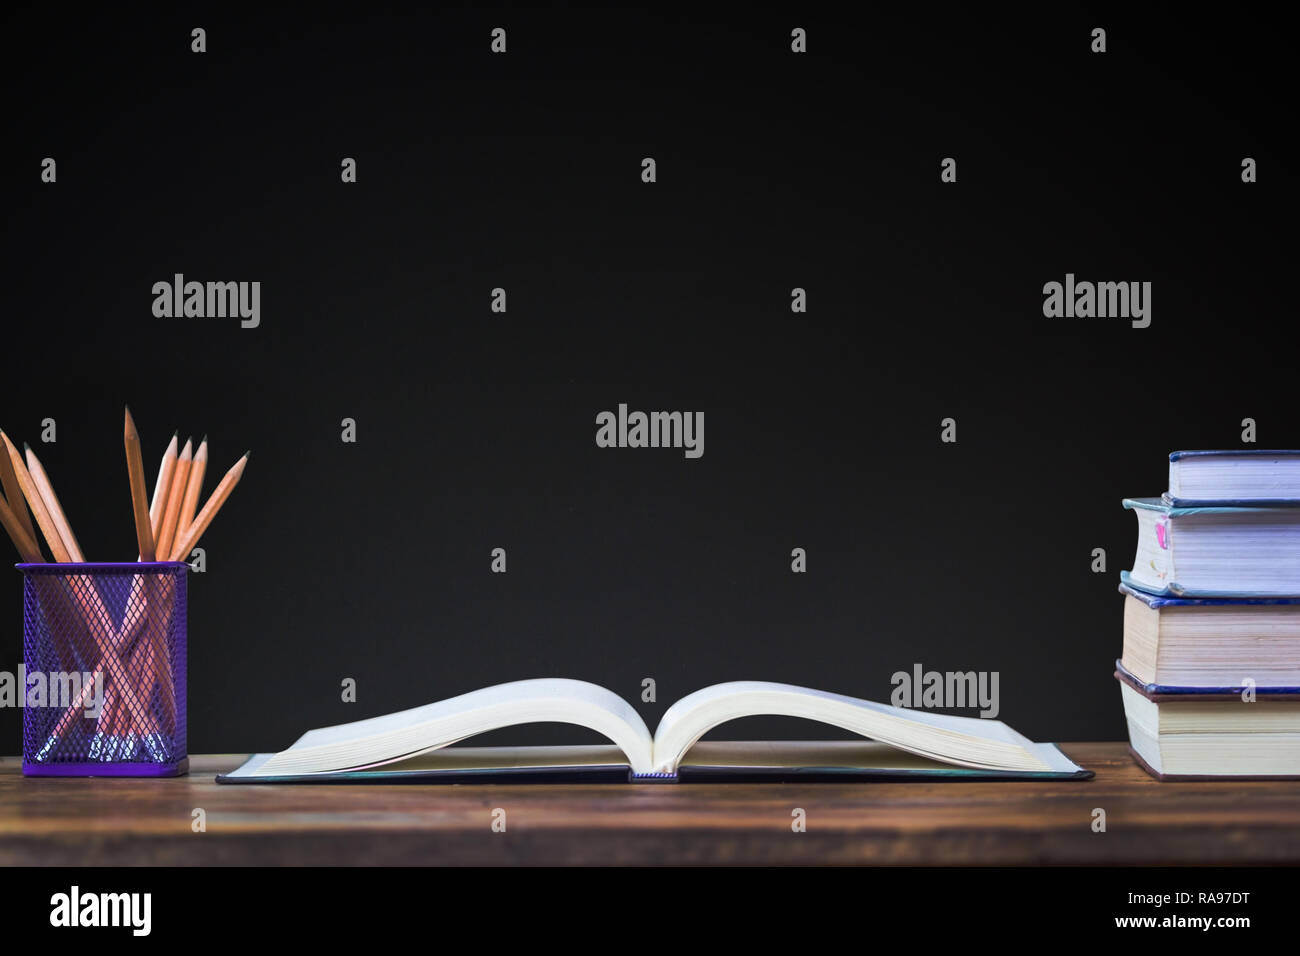 Education background concept. Opened book and pencil on wood table with black chalkboard as background. Teacher table. Stock Photo